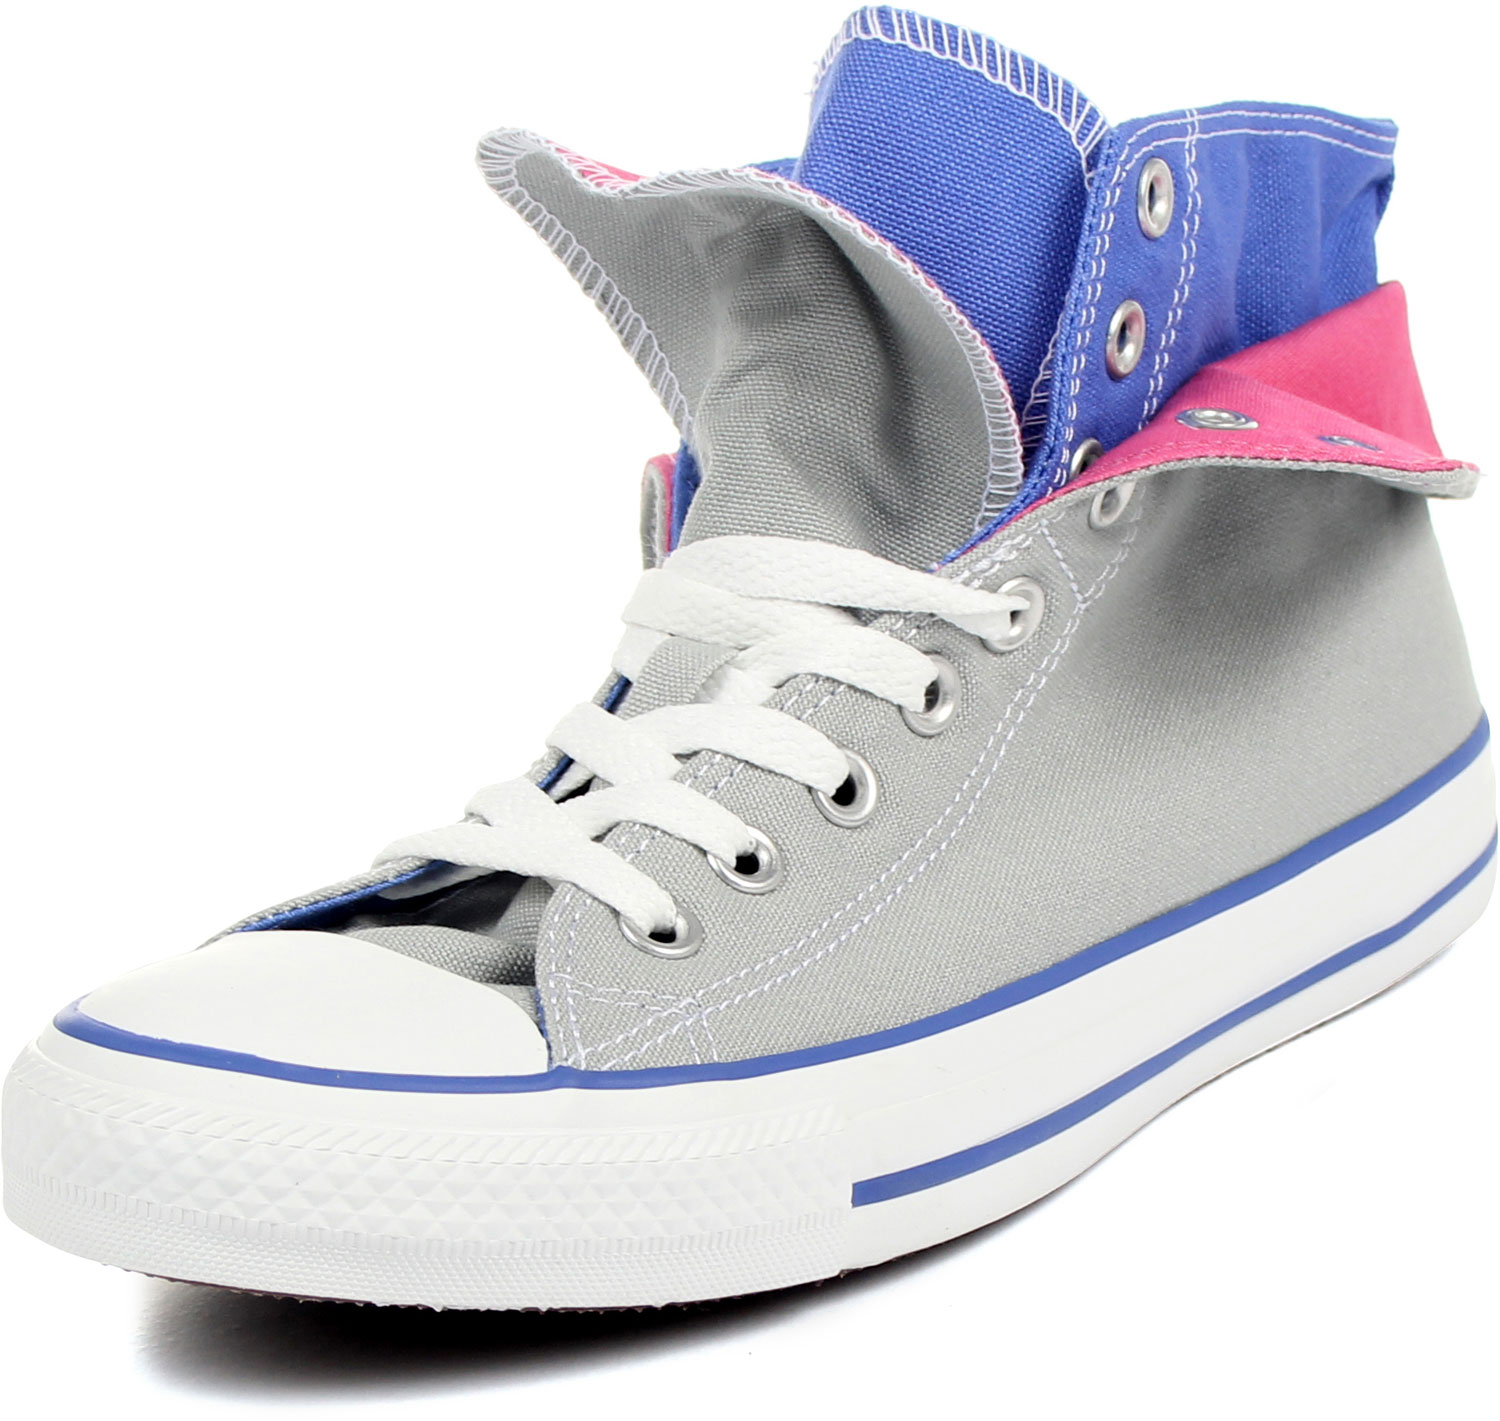 Converse - Chuck Taylor All Star Two Fold Seasonal Plus Hi Canvas Shoes in  Mirage Gray/B. Blue